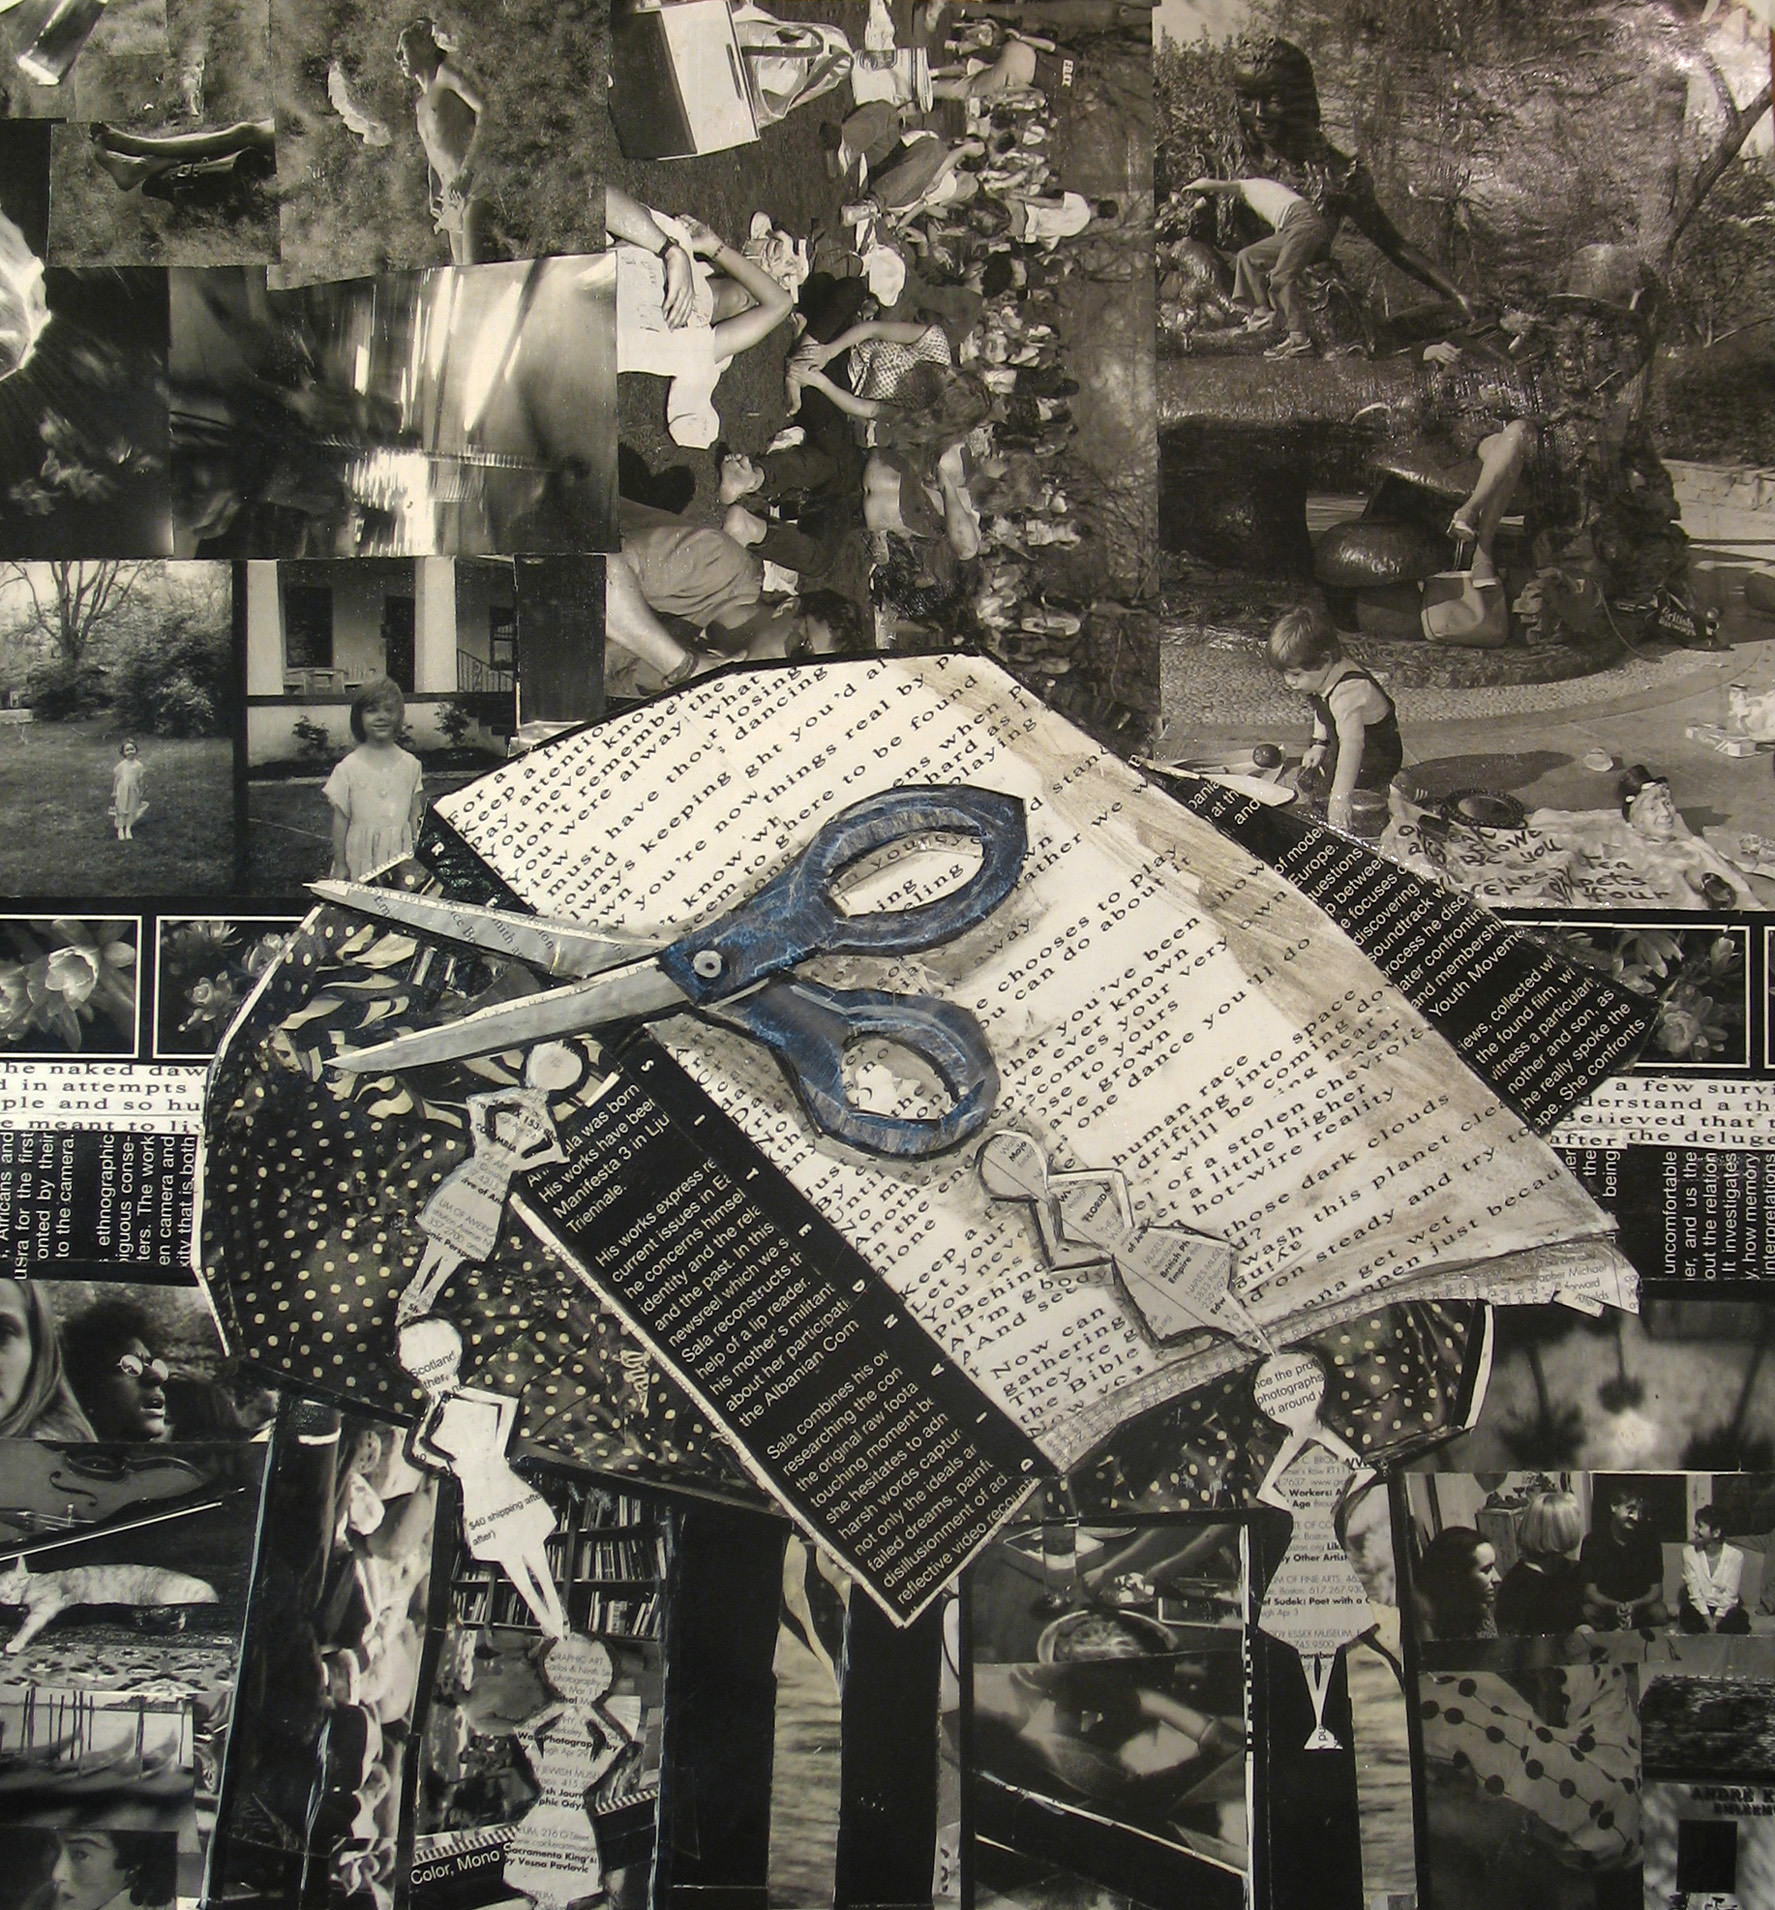 TAWDRY BITS by Kathryn DeMarco collage 30 x 24